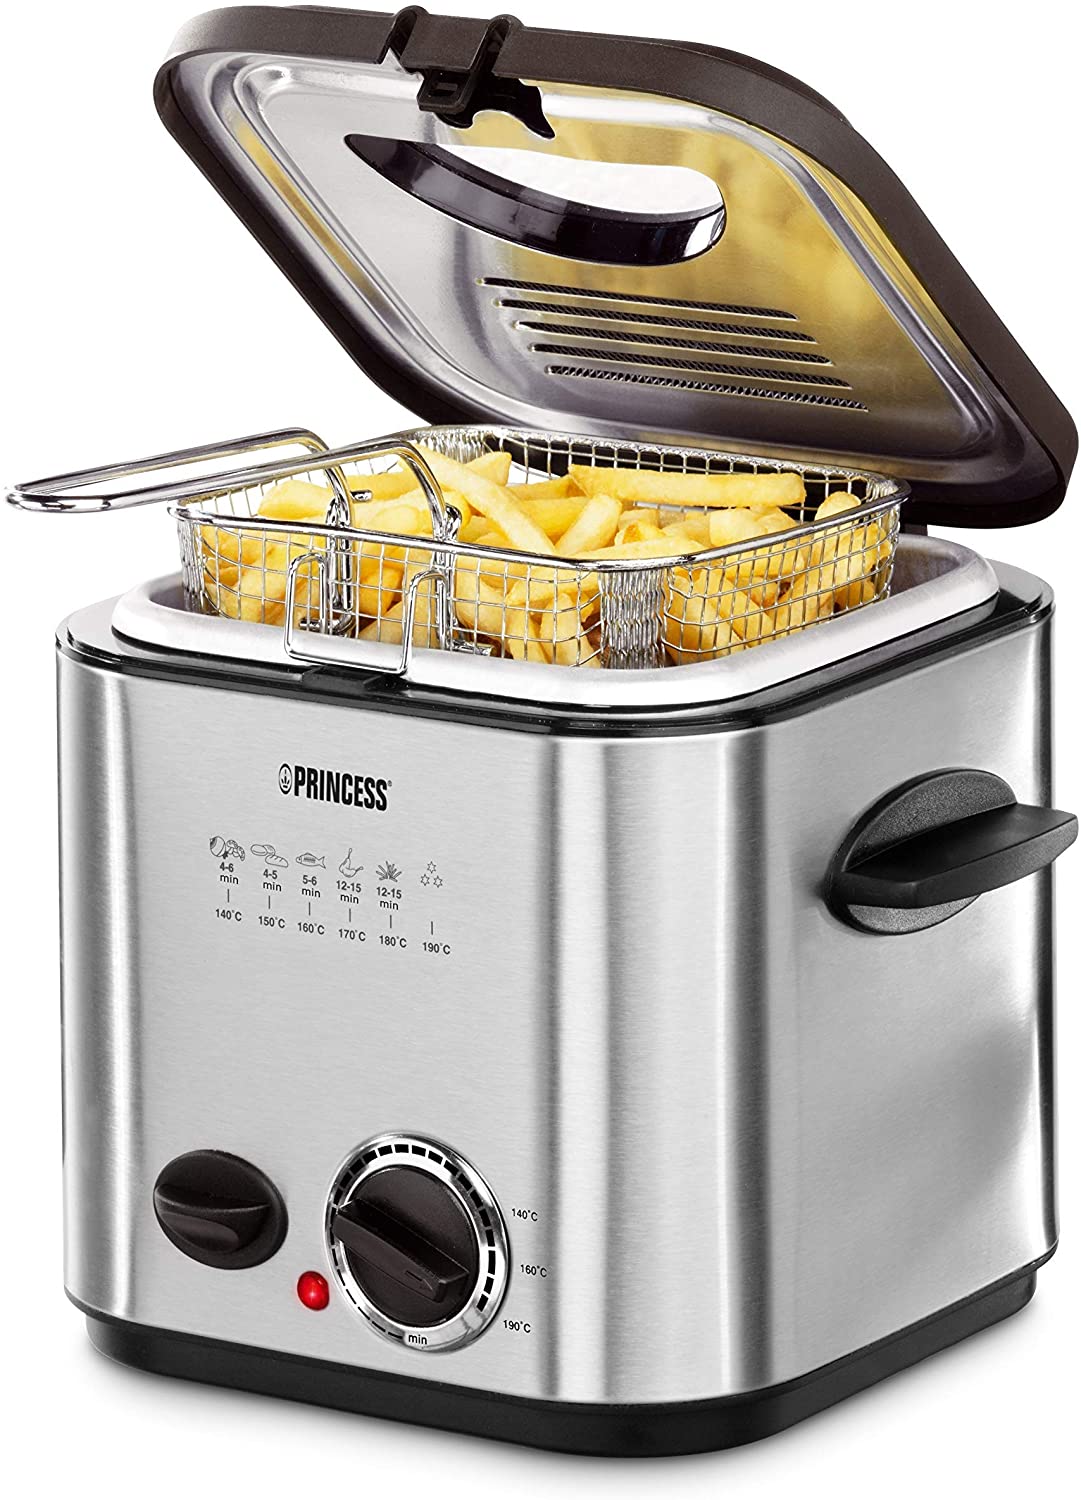 Princess 182611 Mini Fryer with Fondue - Fast Heating - Odour Filter - 1.2 Litre Capacity